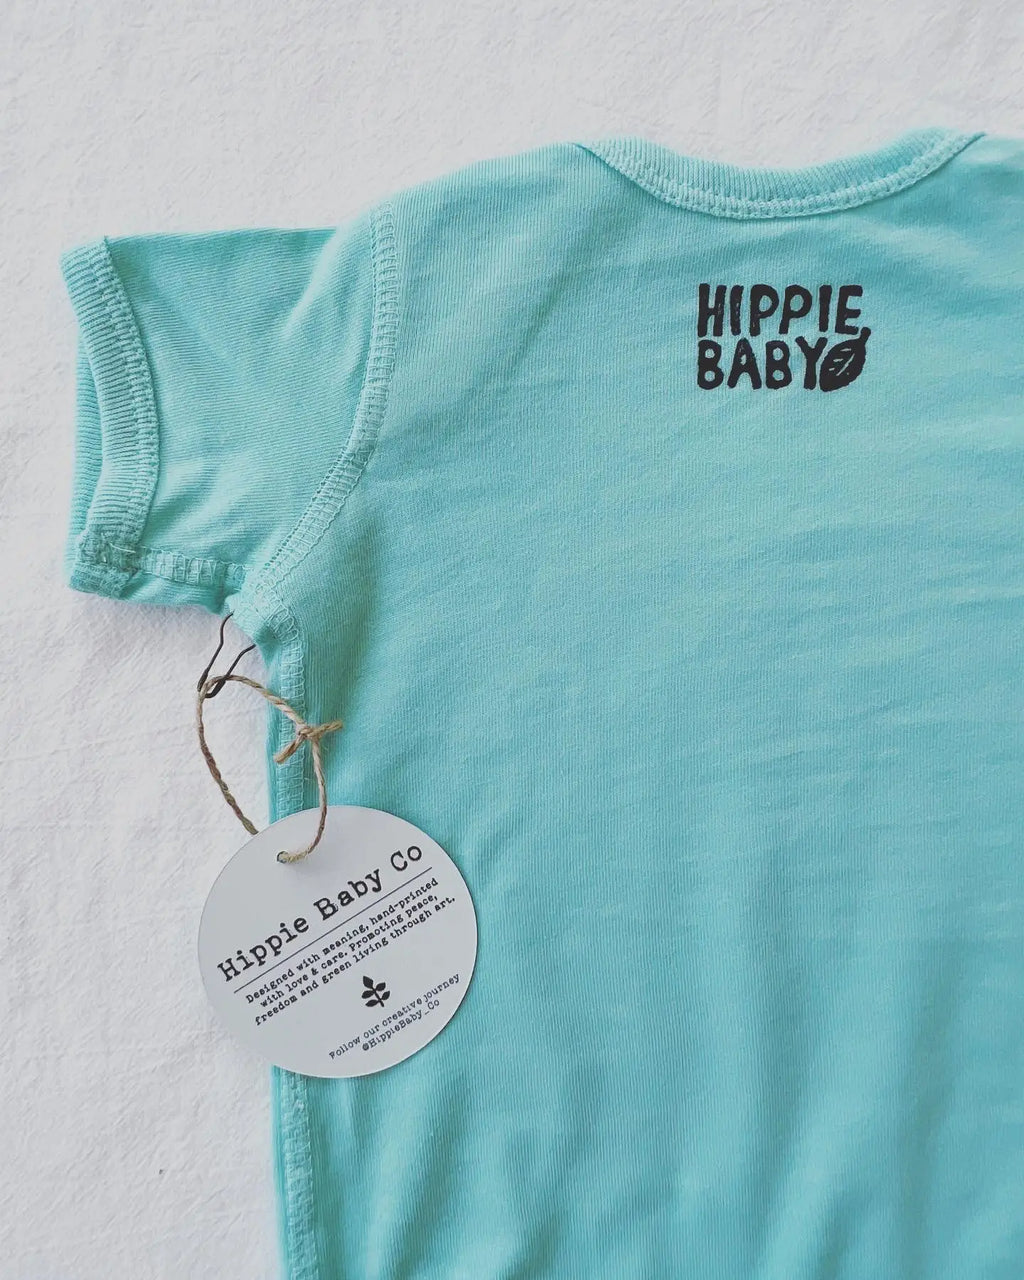 Peace Dove Baby Bodysuit, Hippie baby outfit